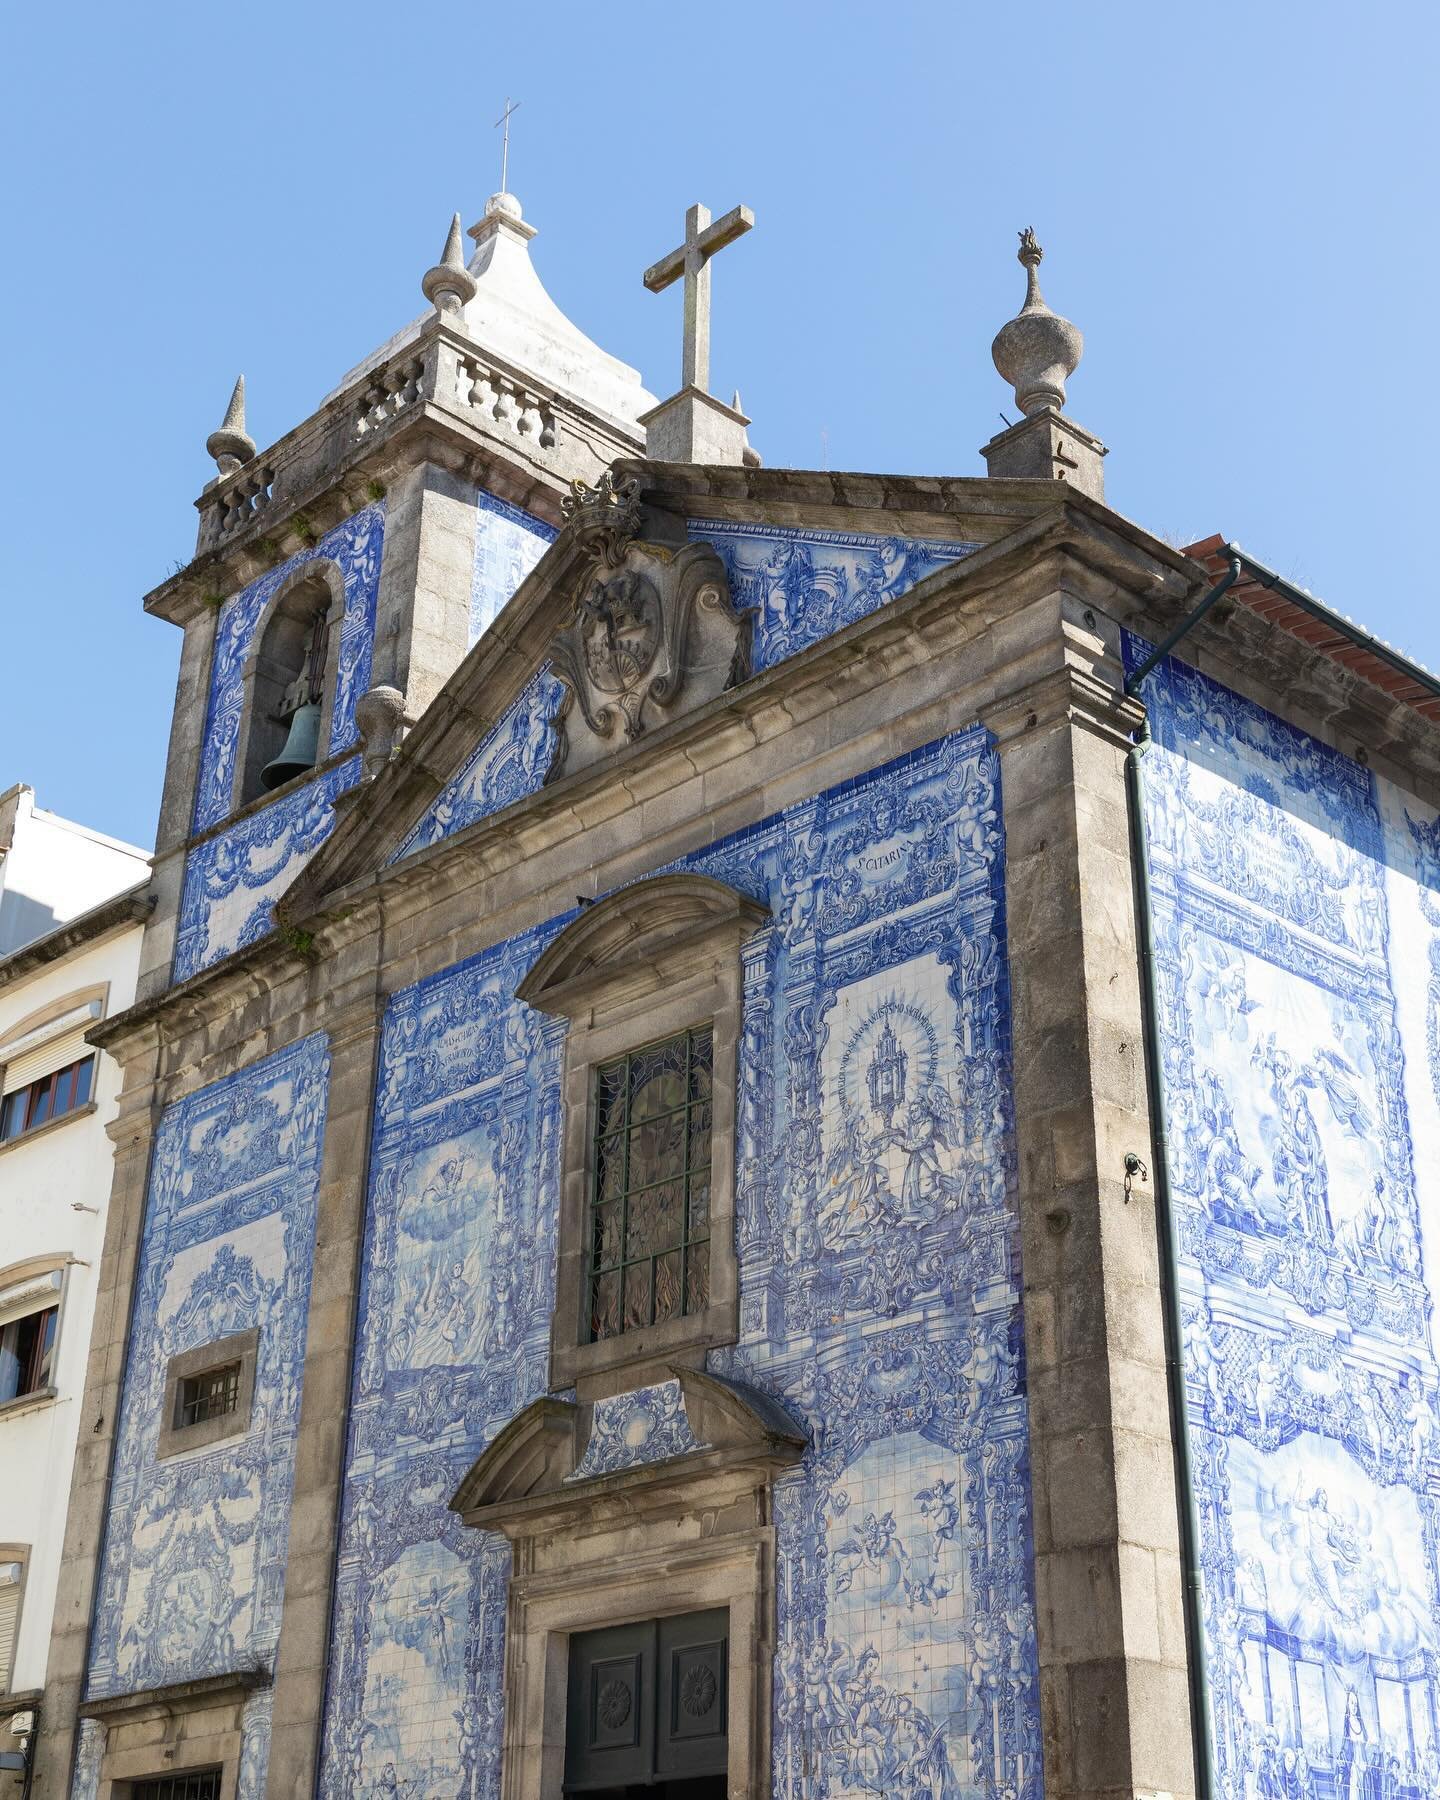 There&rsquo;s nothing quite like the blues of Portugal. I woke up today wishing I could transport myself to Lisbon, for an afternoon of wandering the streets, photographing the beautiful tiled buildings, and indulging in a three hour lunch with frien